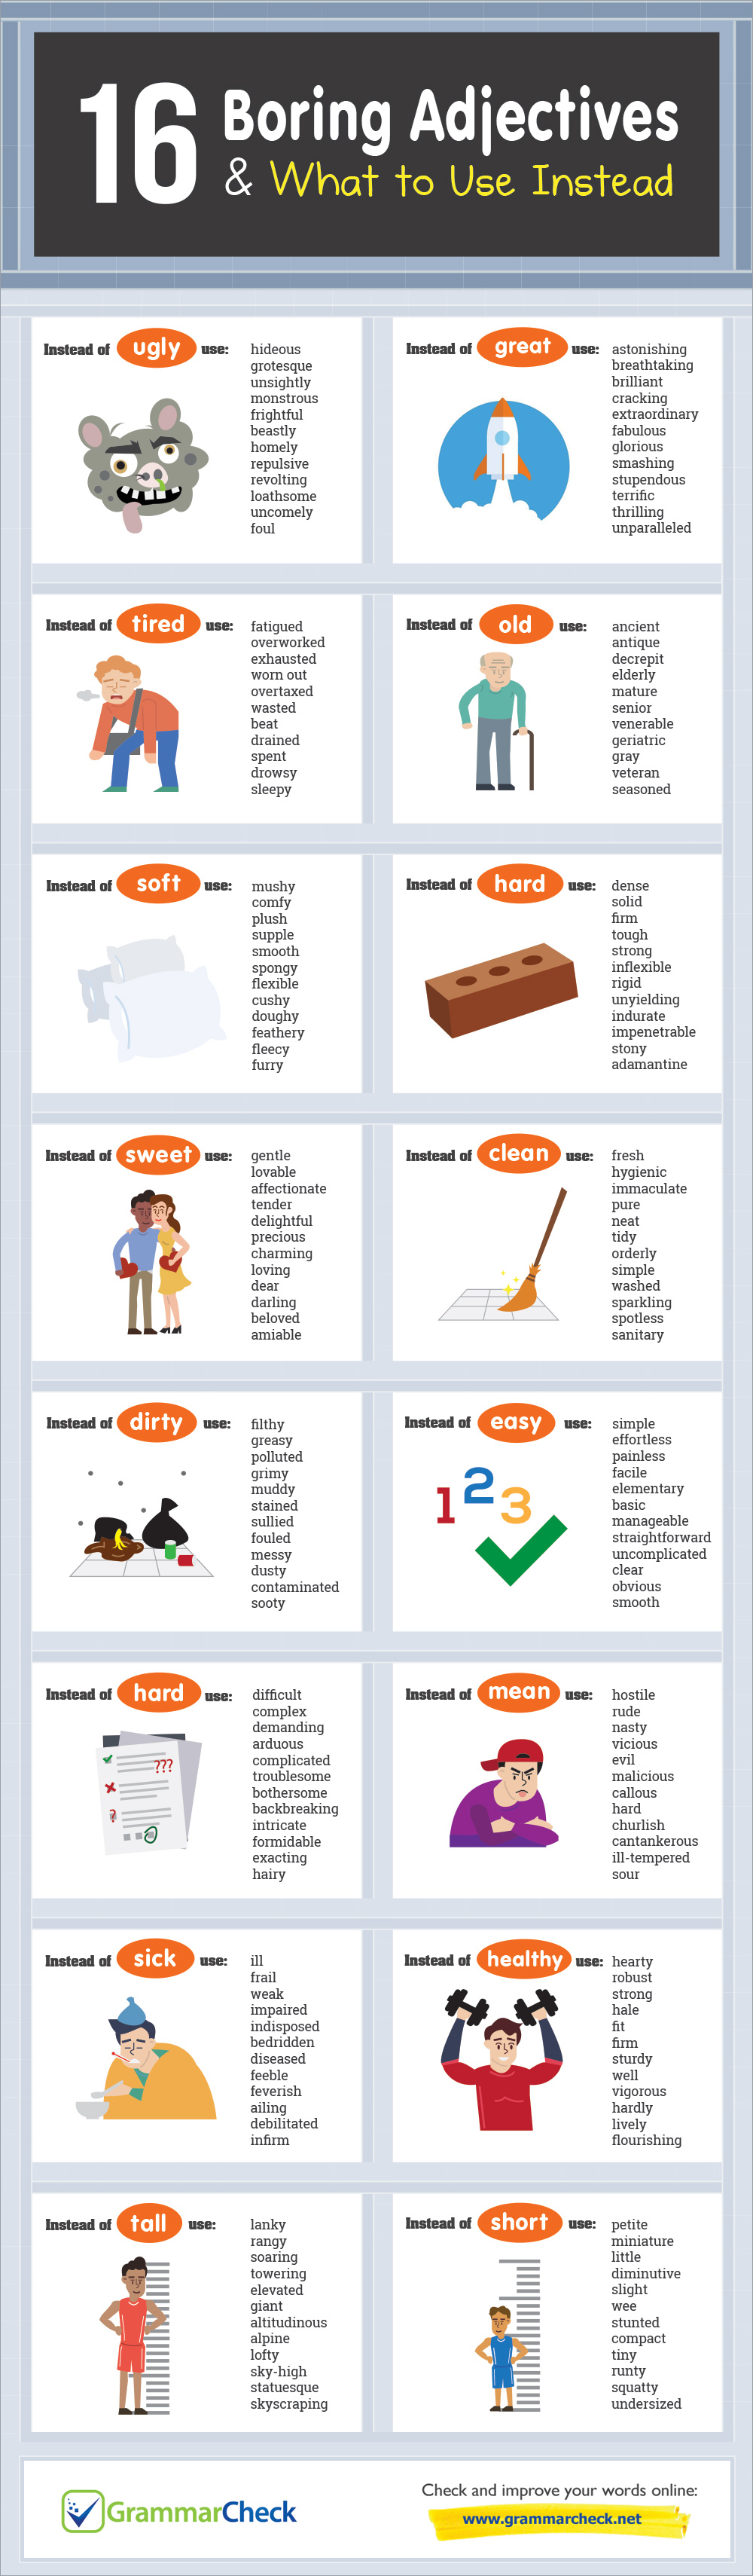 16 Boring Adjectives & What to Use Instead (Infographic)